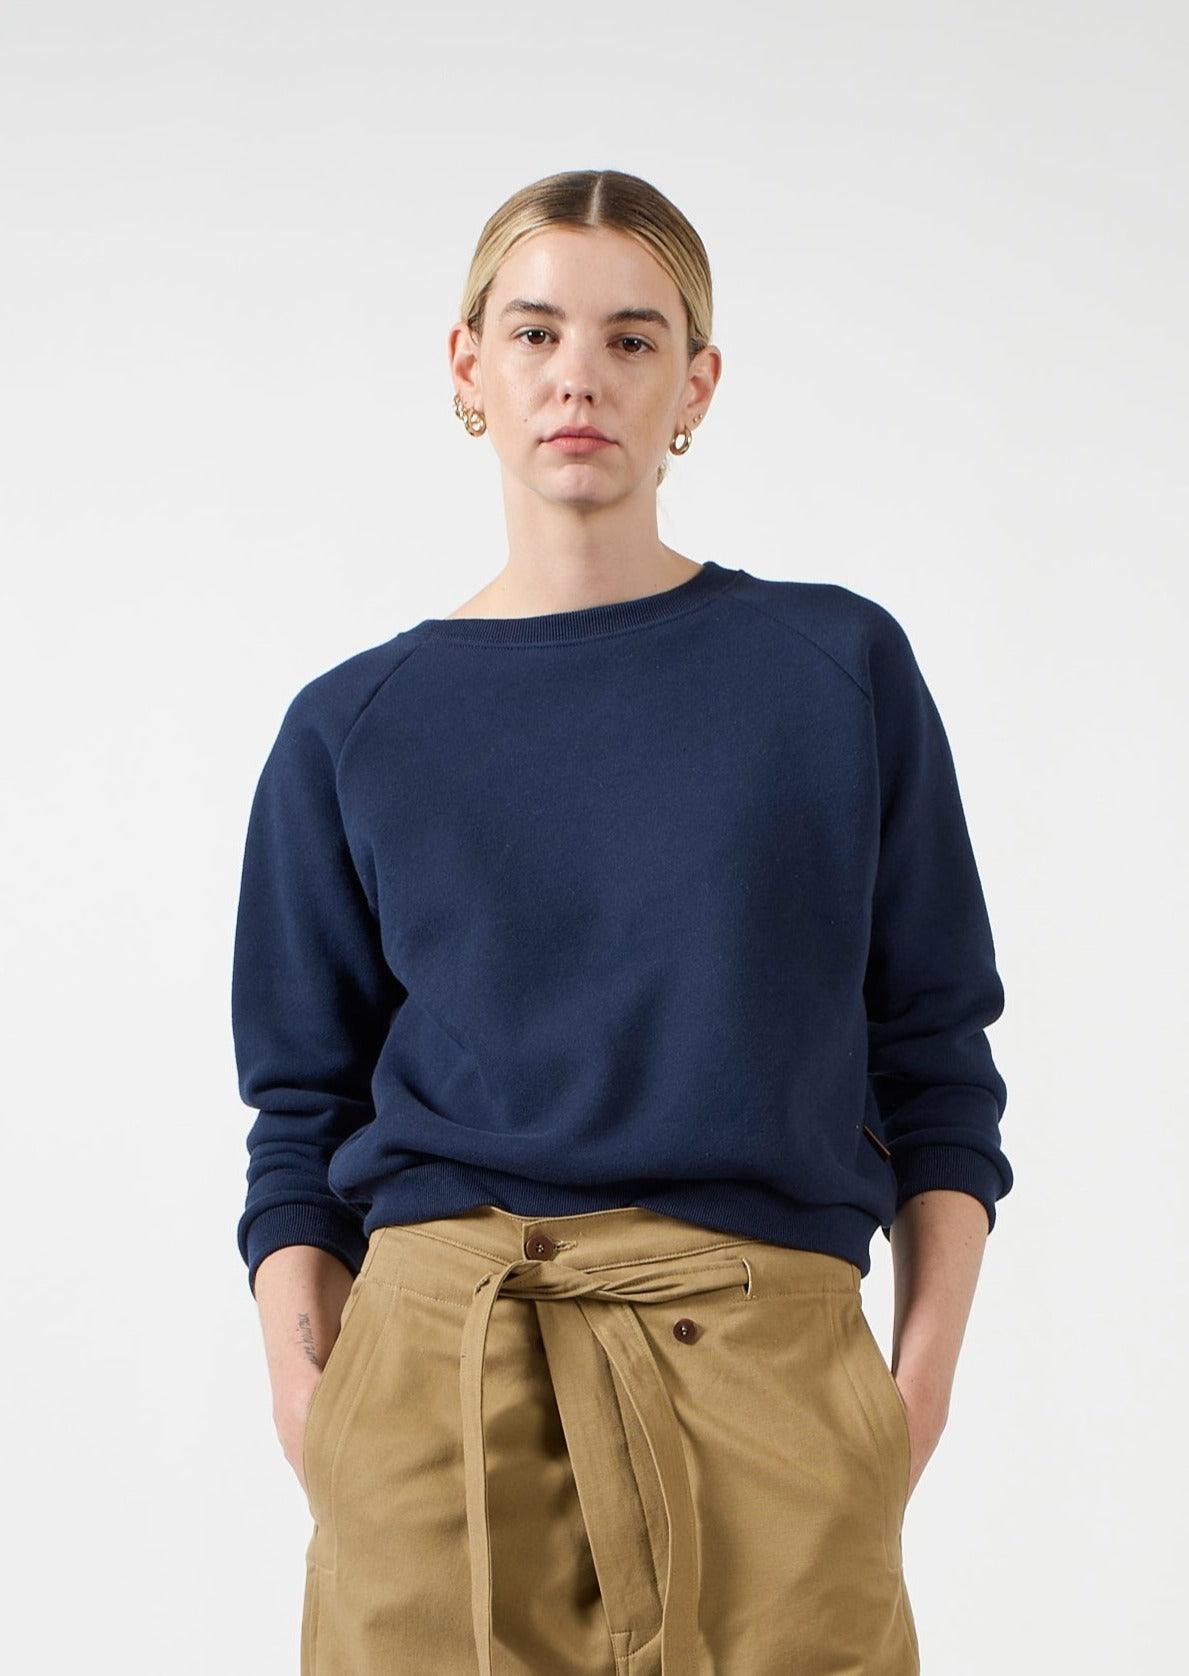 The Daily Sweatshirt in Navy Close Up Front 2 